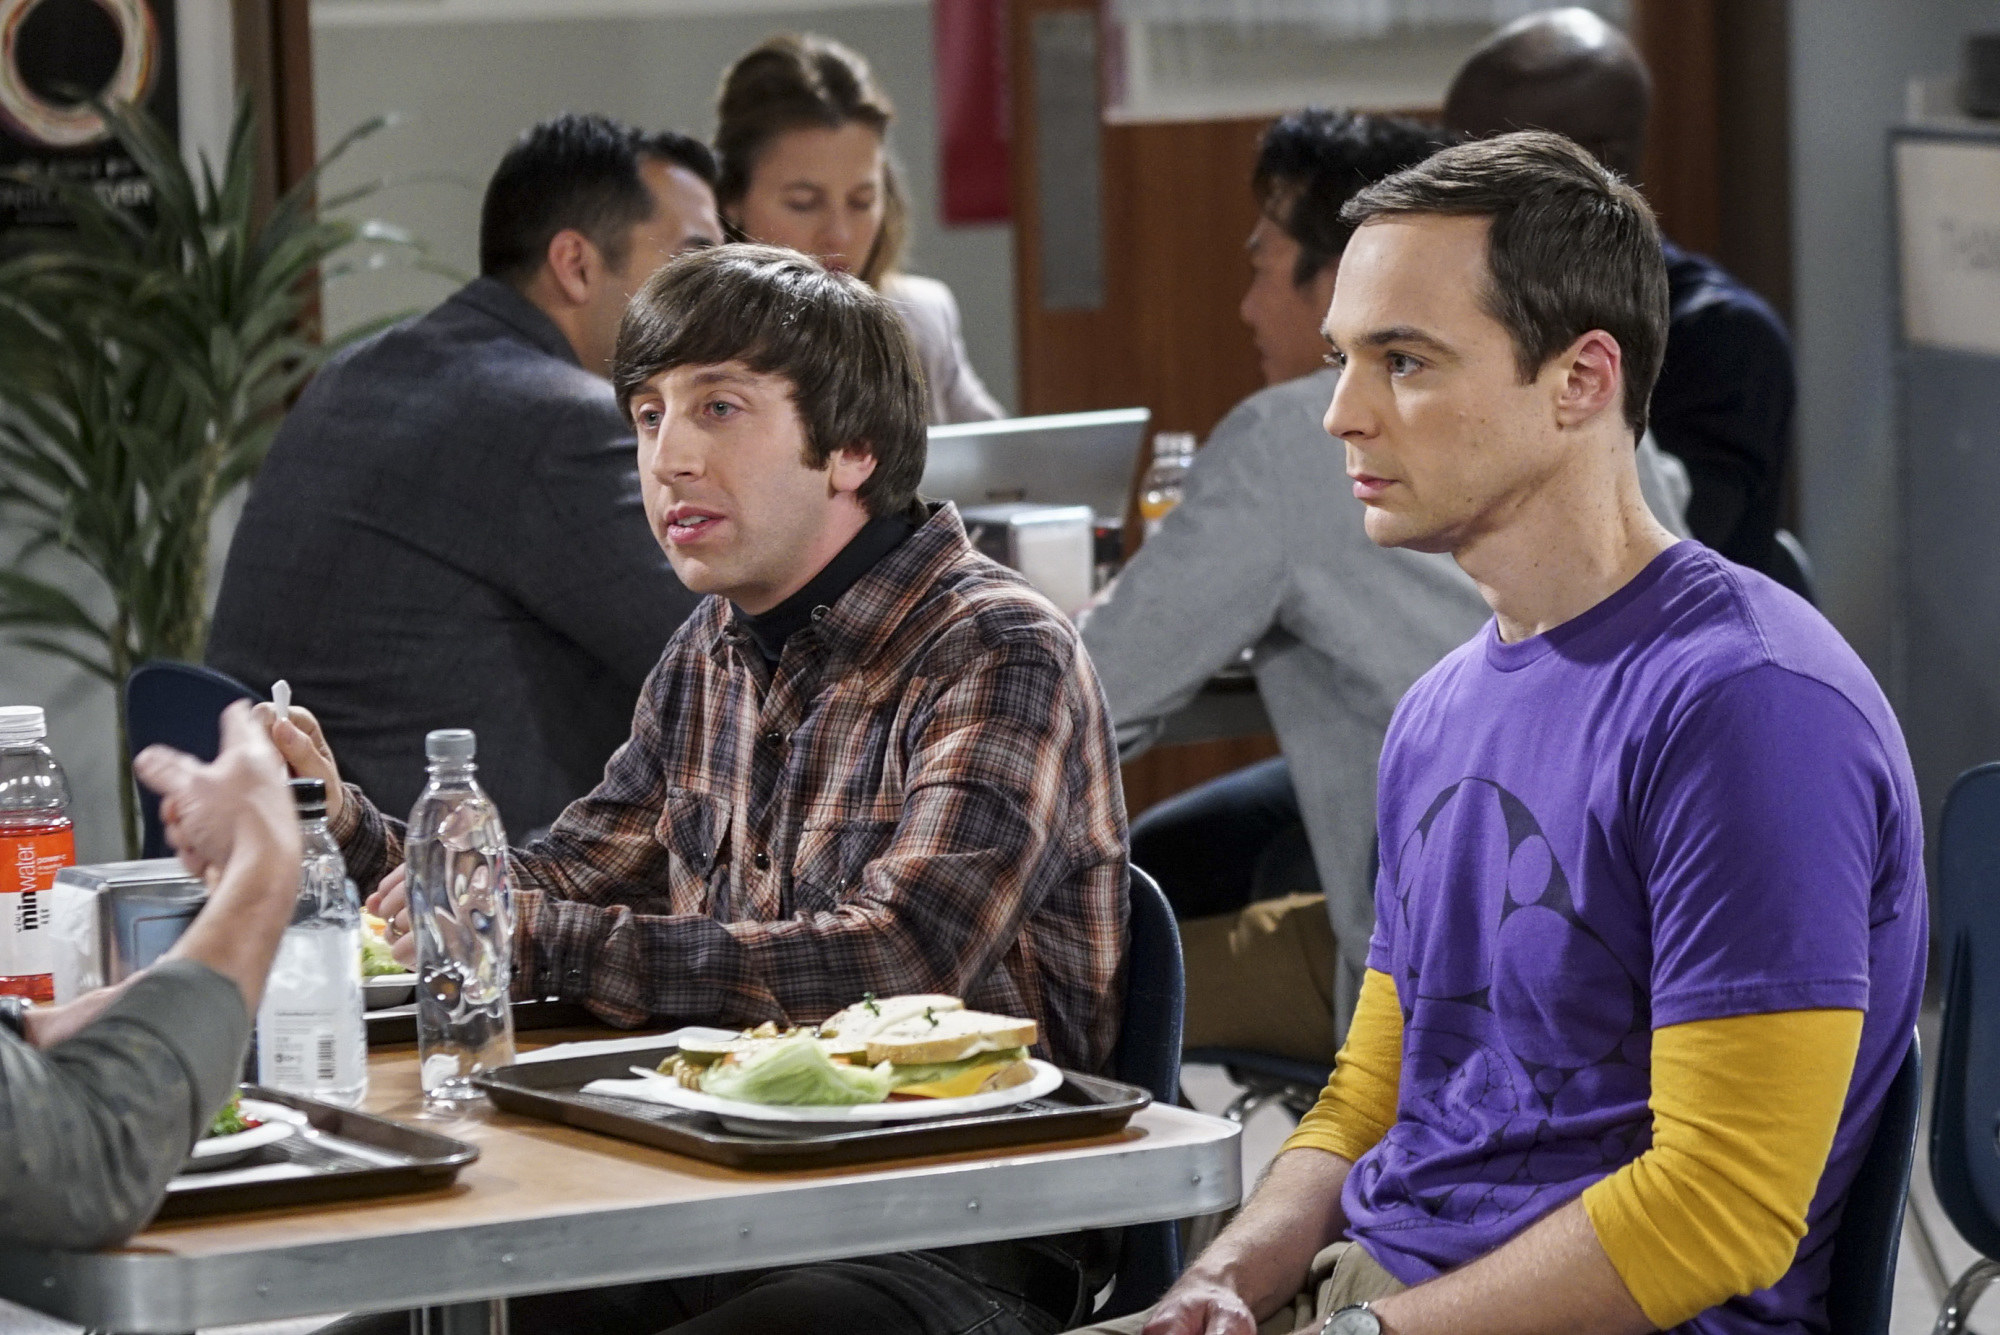 Simon and Jim sitting next to each other in a cafeteria during a scene